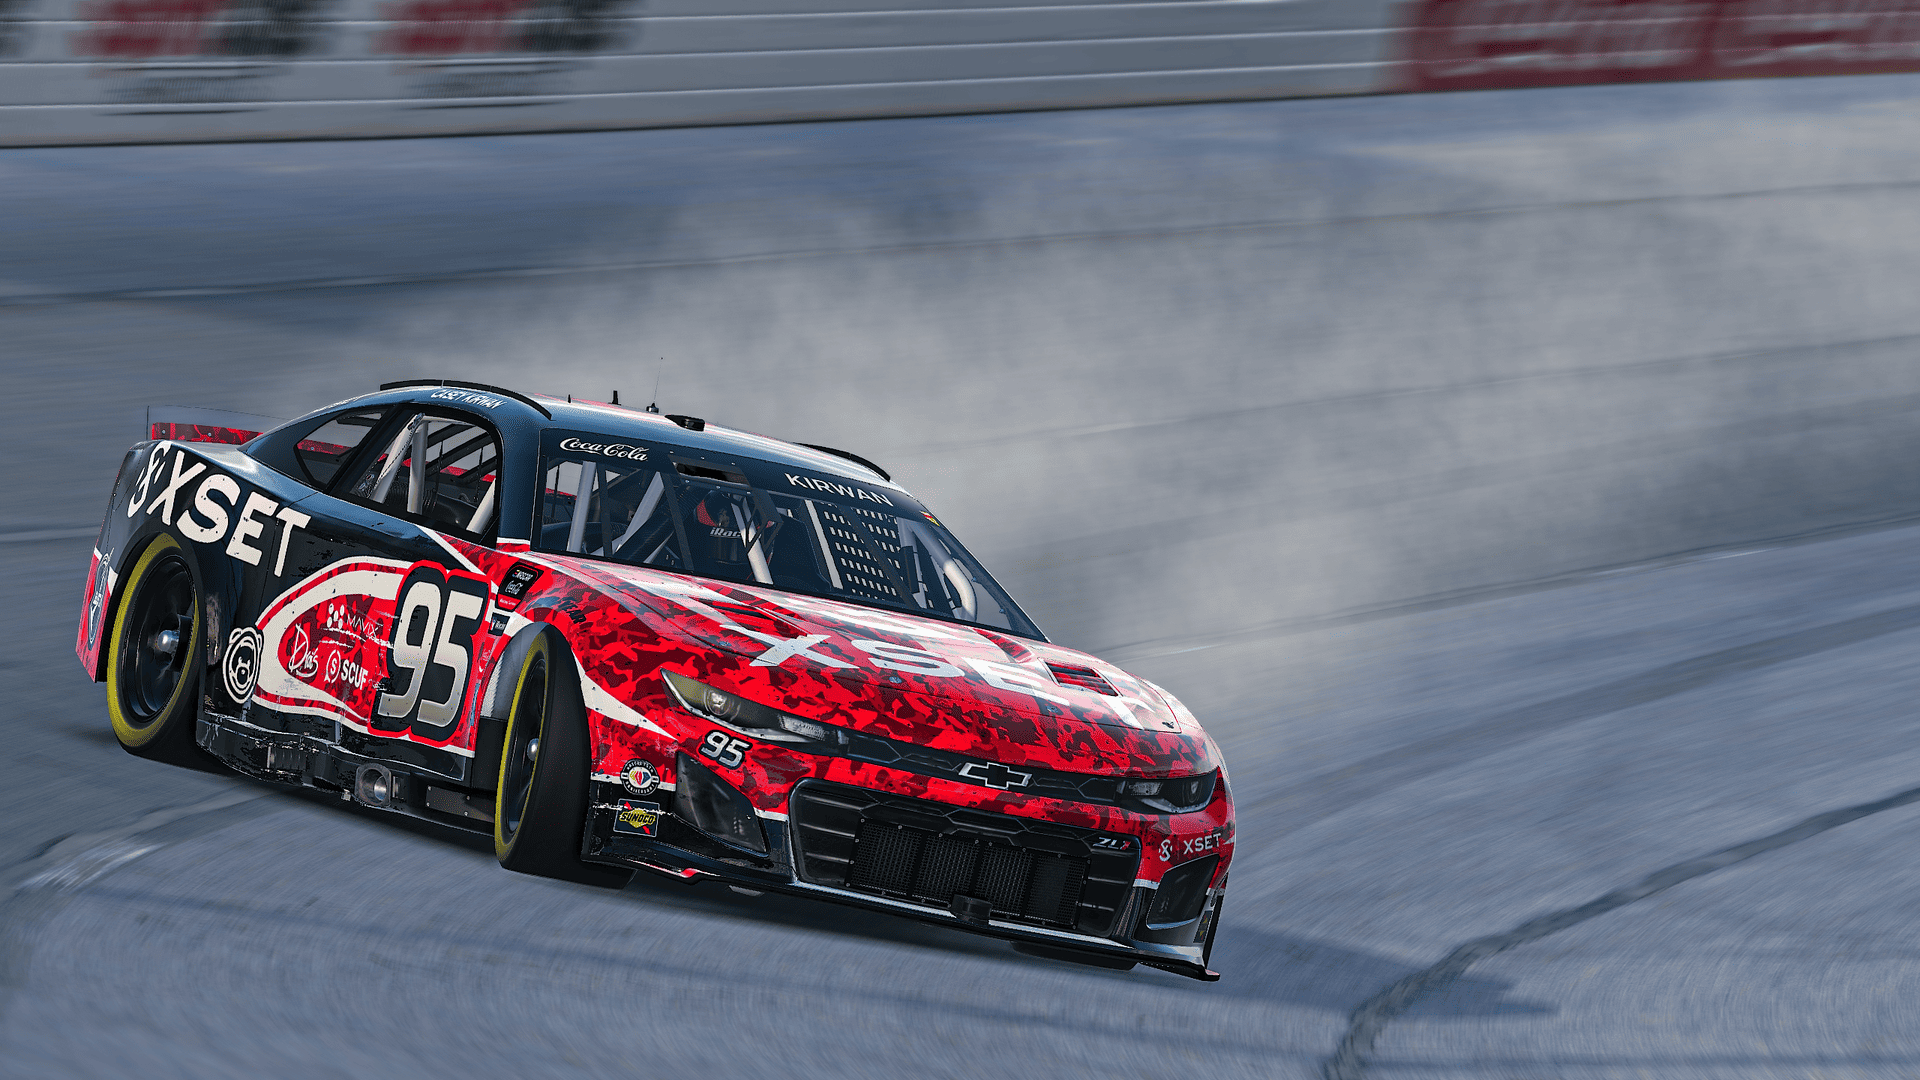 Casey Kirwan continues to recreate iconic NASCAR moments as he racks up wins in the eNASCAR Coca-Cola iRacing Series.